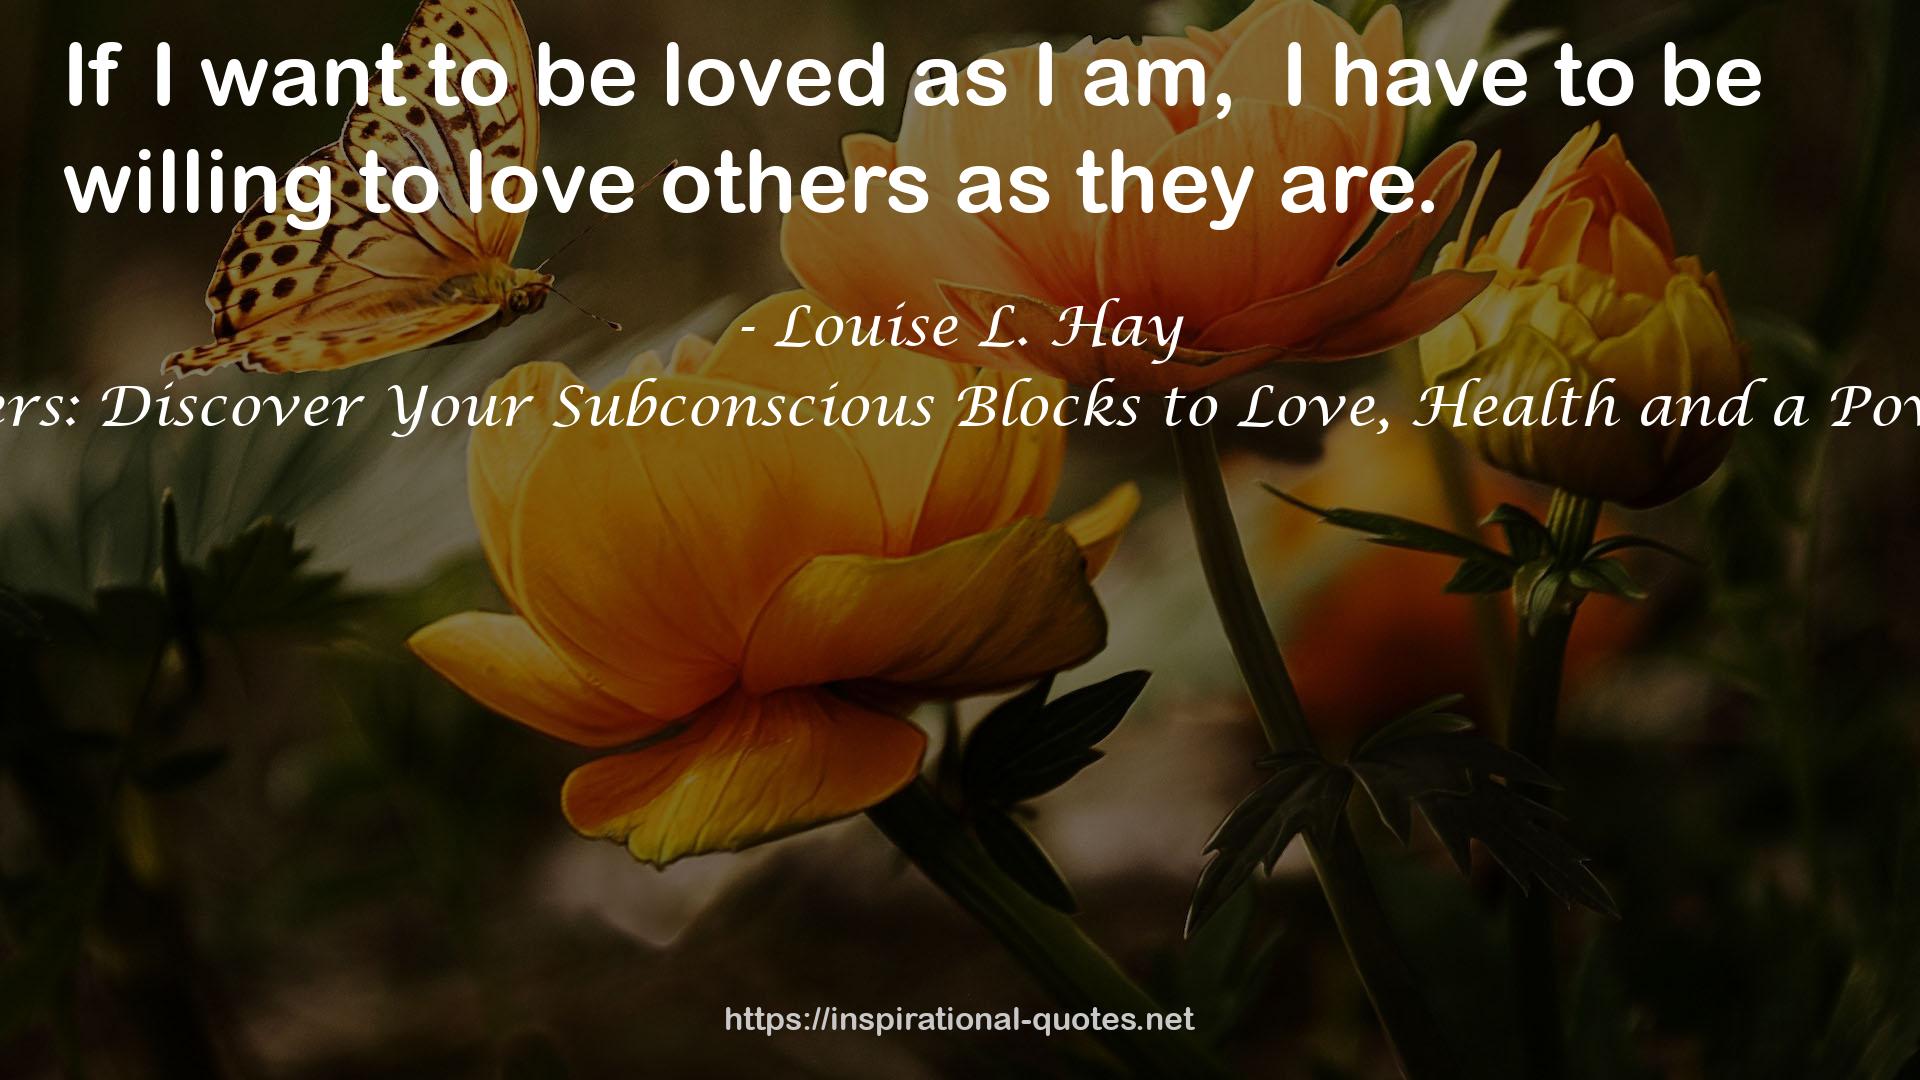 Dissolving Barriers: Discover Your Subconscious Blocks to Love, Health and a Powerful Self Image! QUOTES